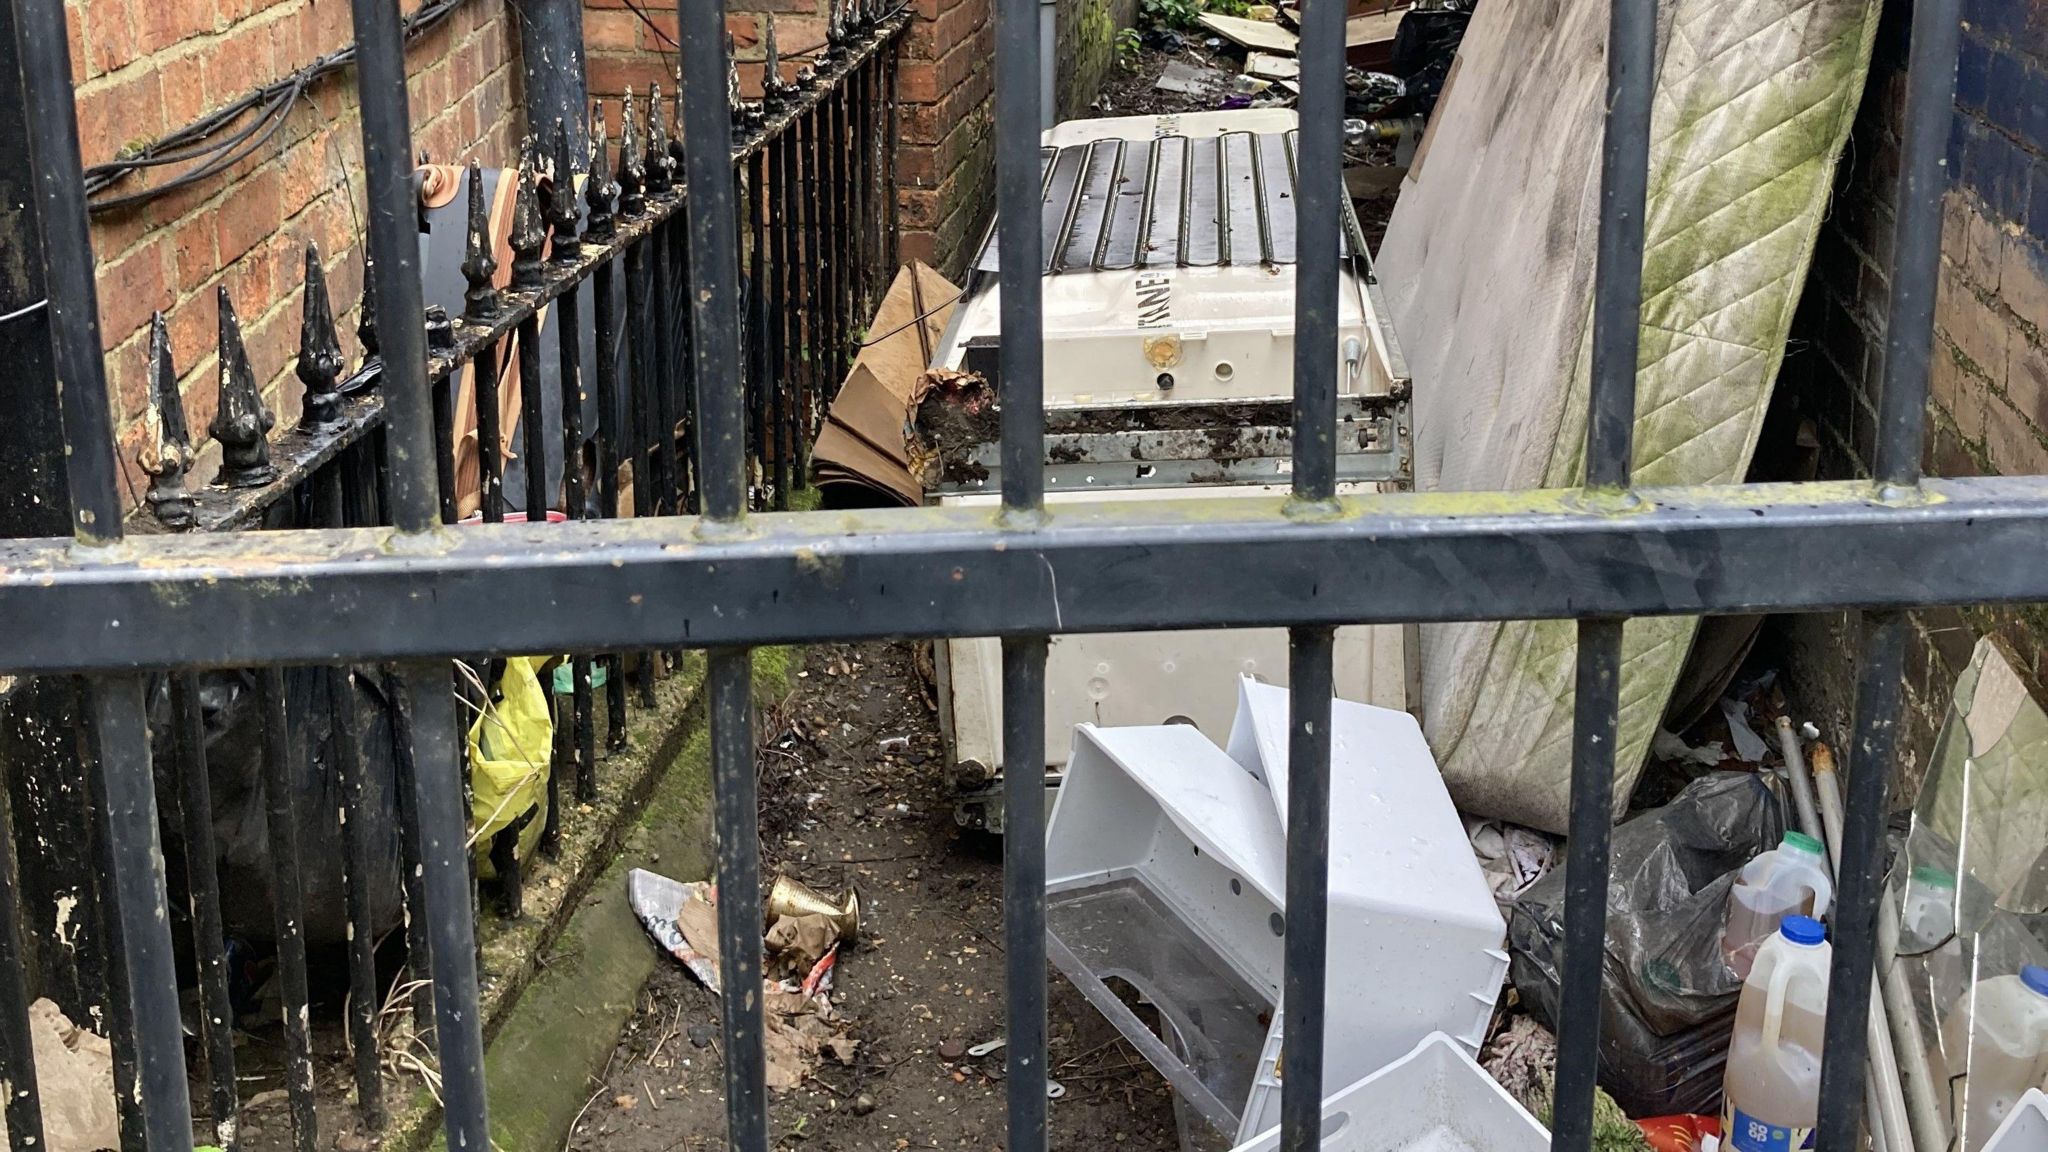 An old mattress and other household items left in a back alley